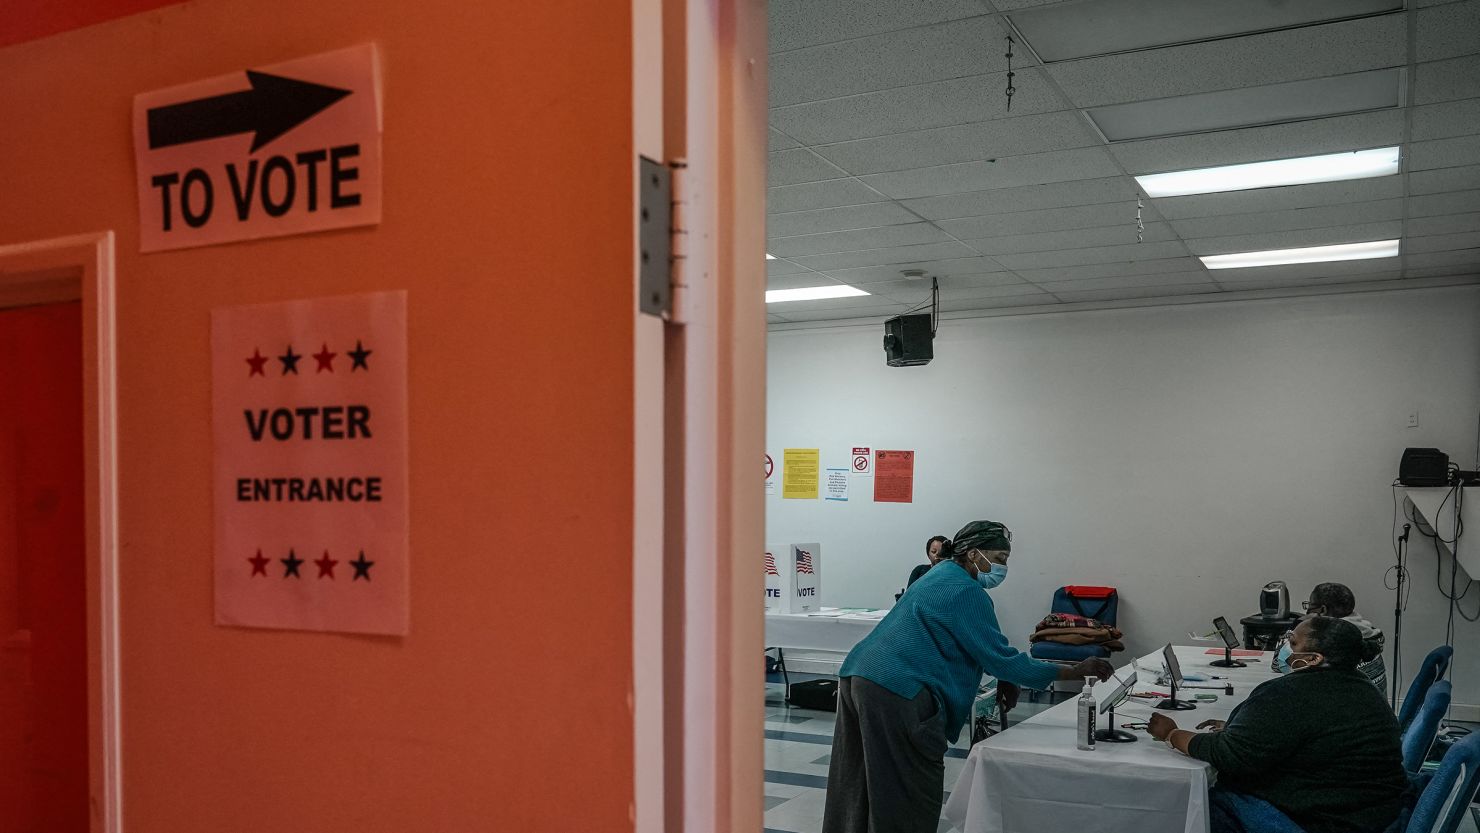 A voter checks in before casting a primary ballot at a polling place in Atlanta, Georgia, on March 12.